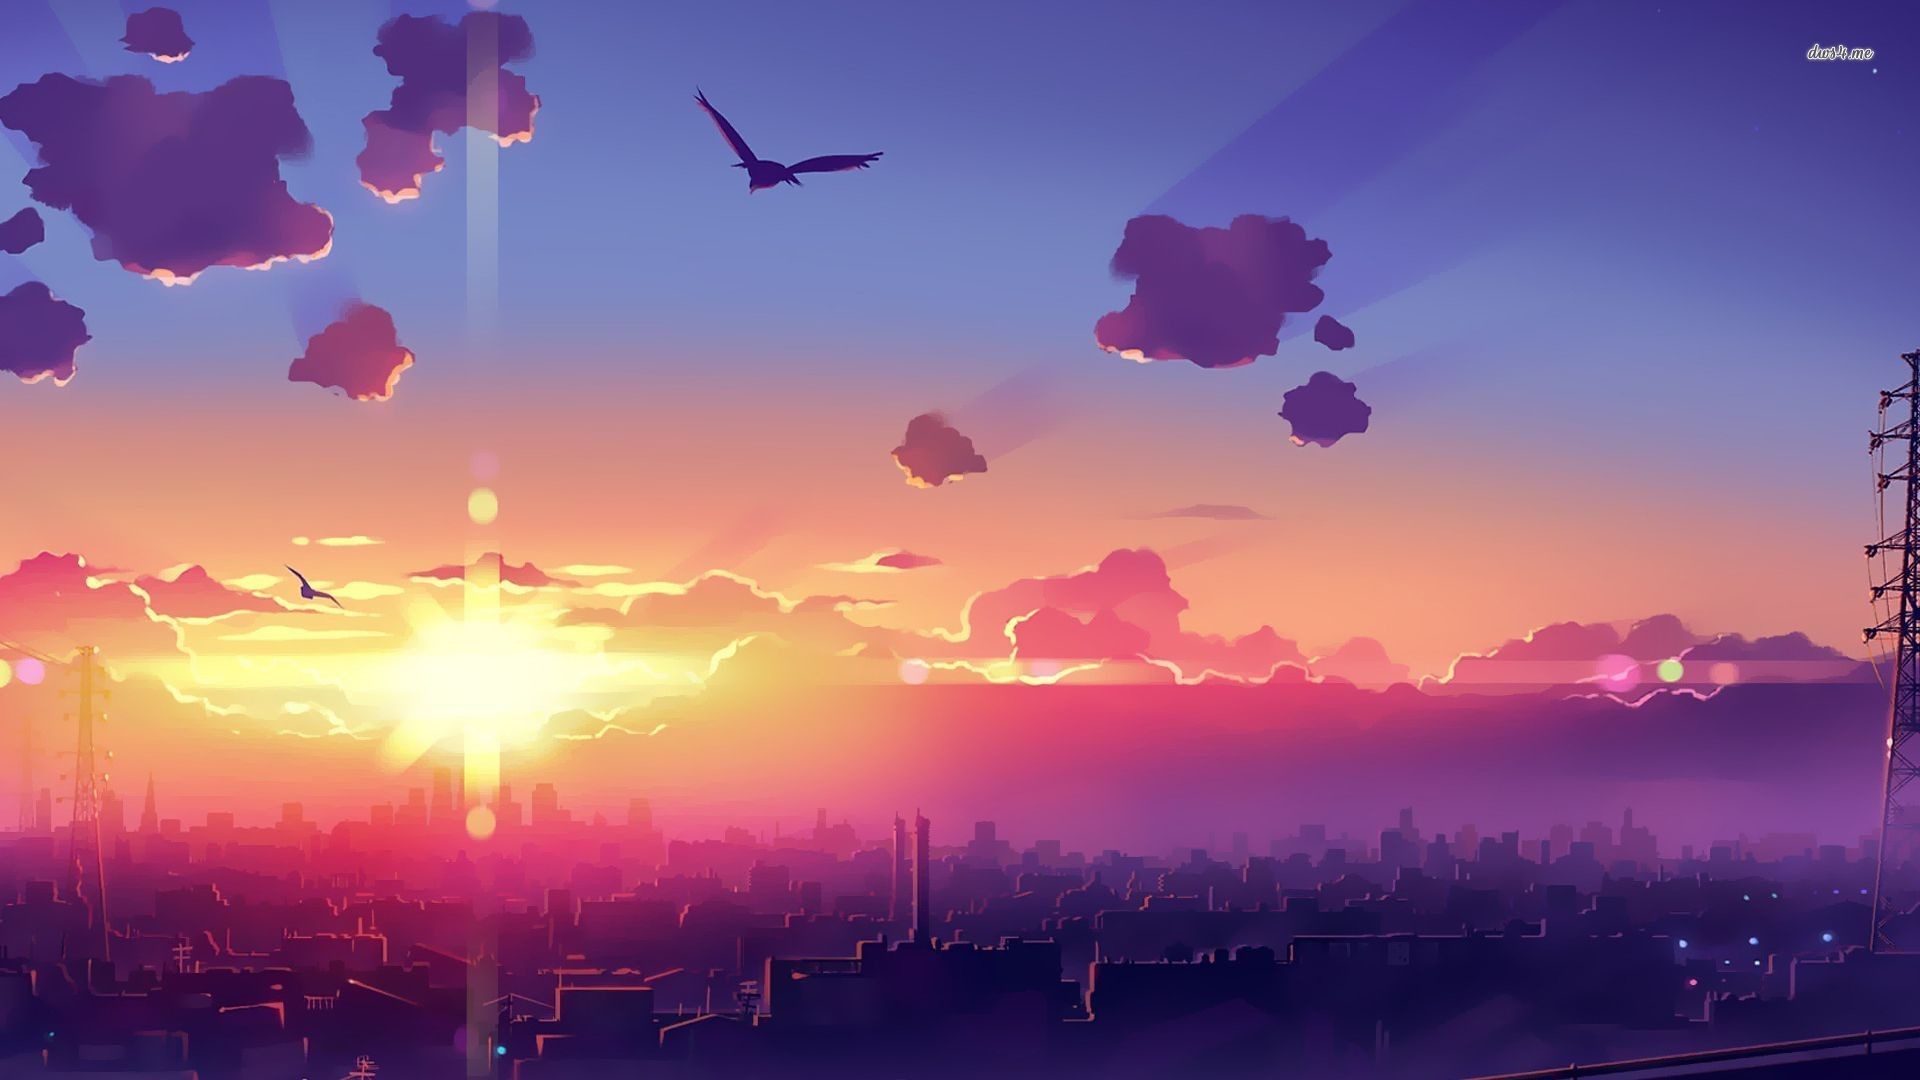 1920x1080 Amazing sunset above the city wallpaper - Anime wallpapers - #41068